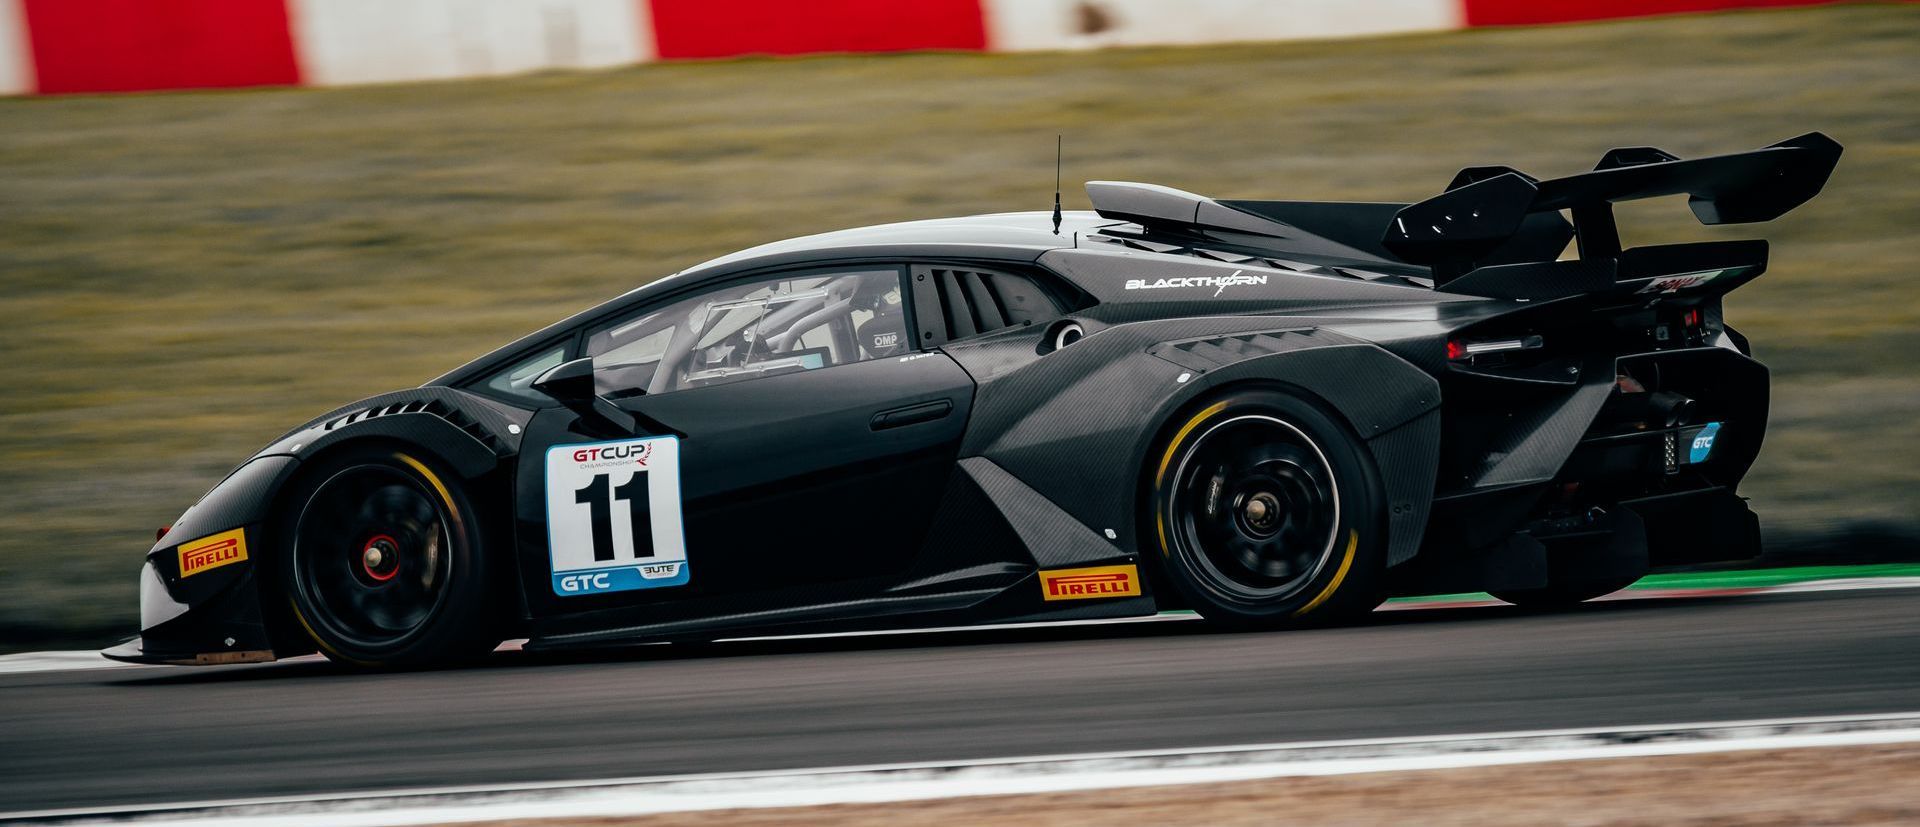 Photographing the GT Cup Test Day at Donington Park